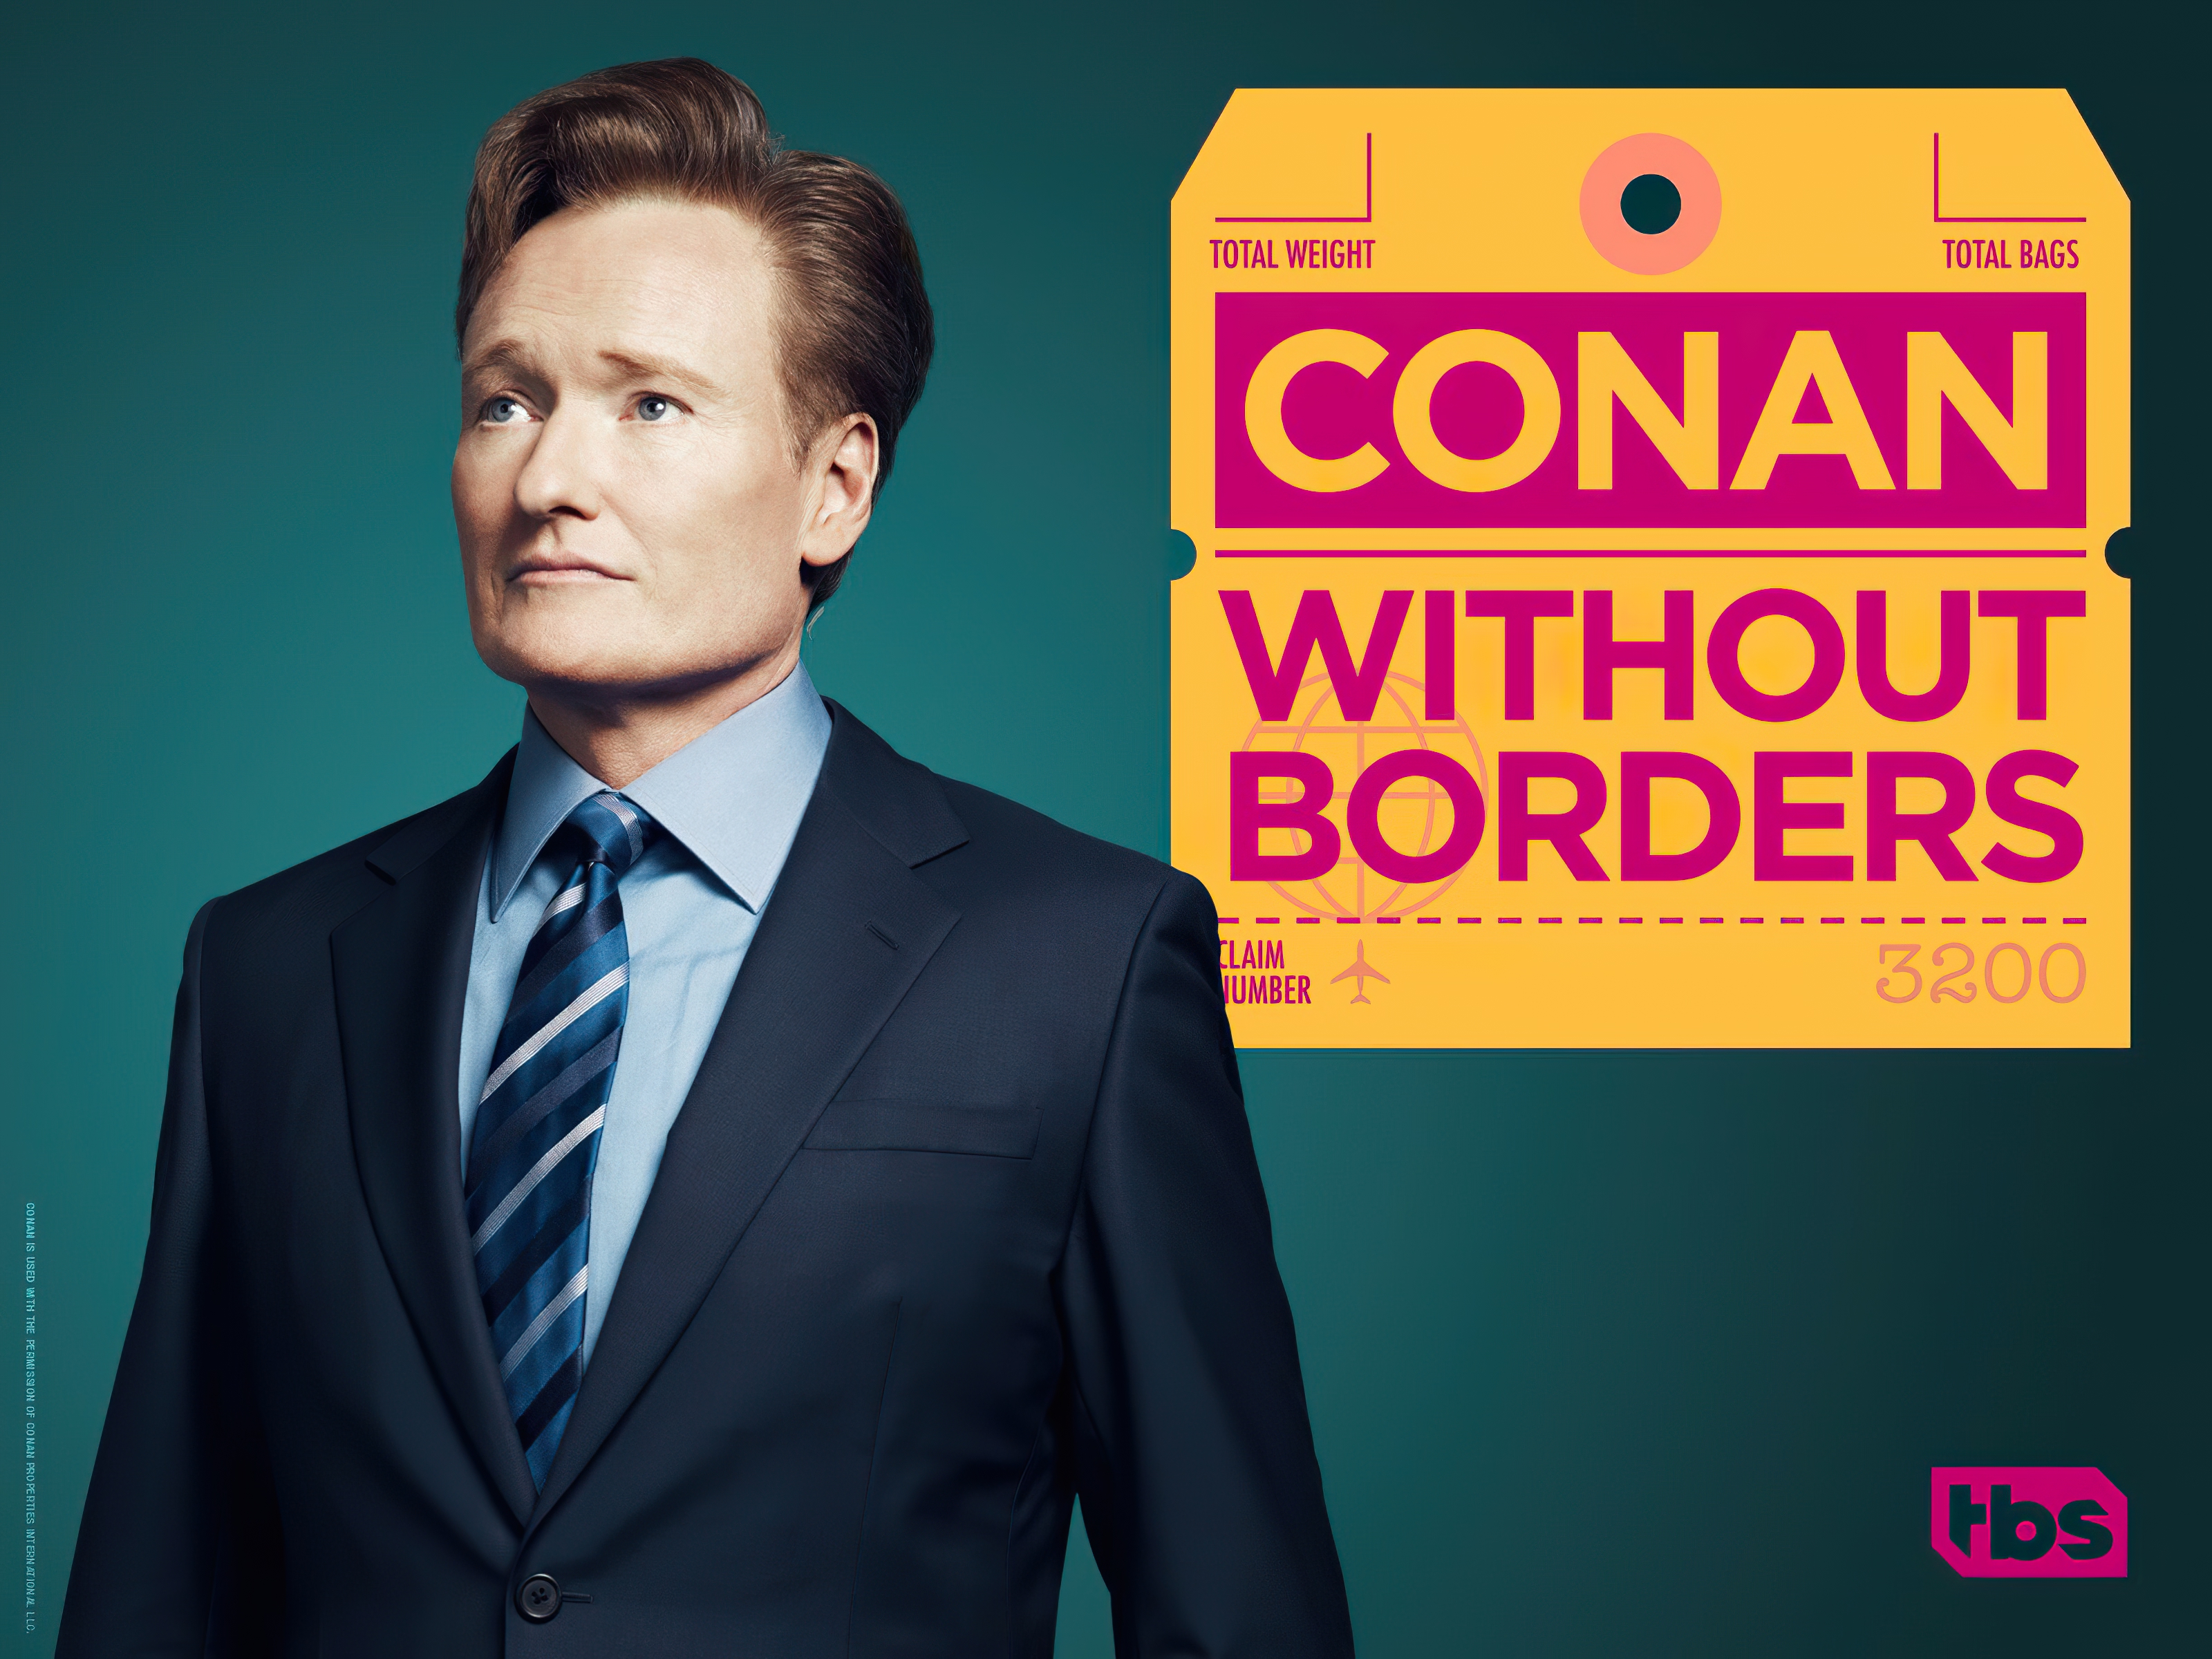 HD desktop wallpaper featuring a promotional image for the show Conan Without Borders with a person posing confidently against a teal background.